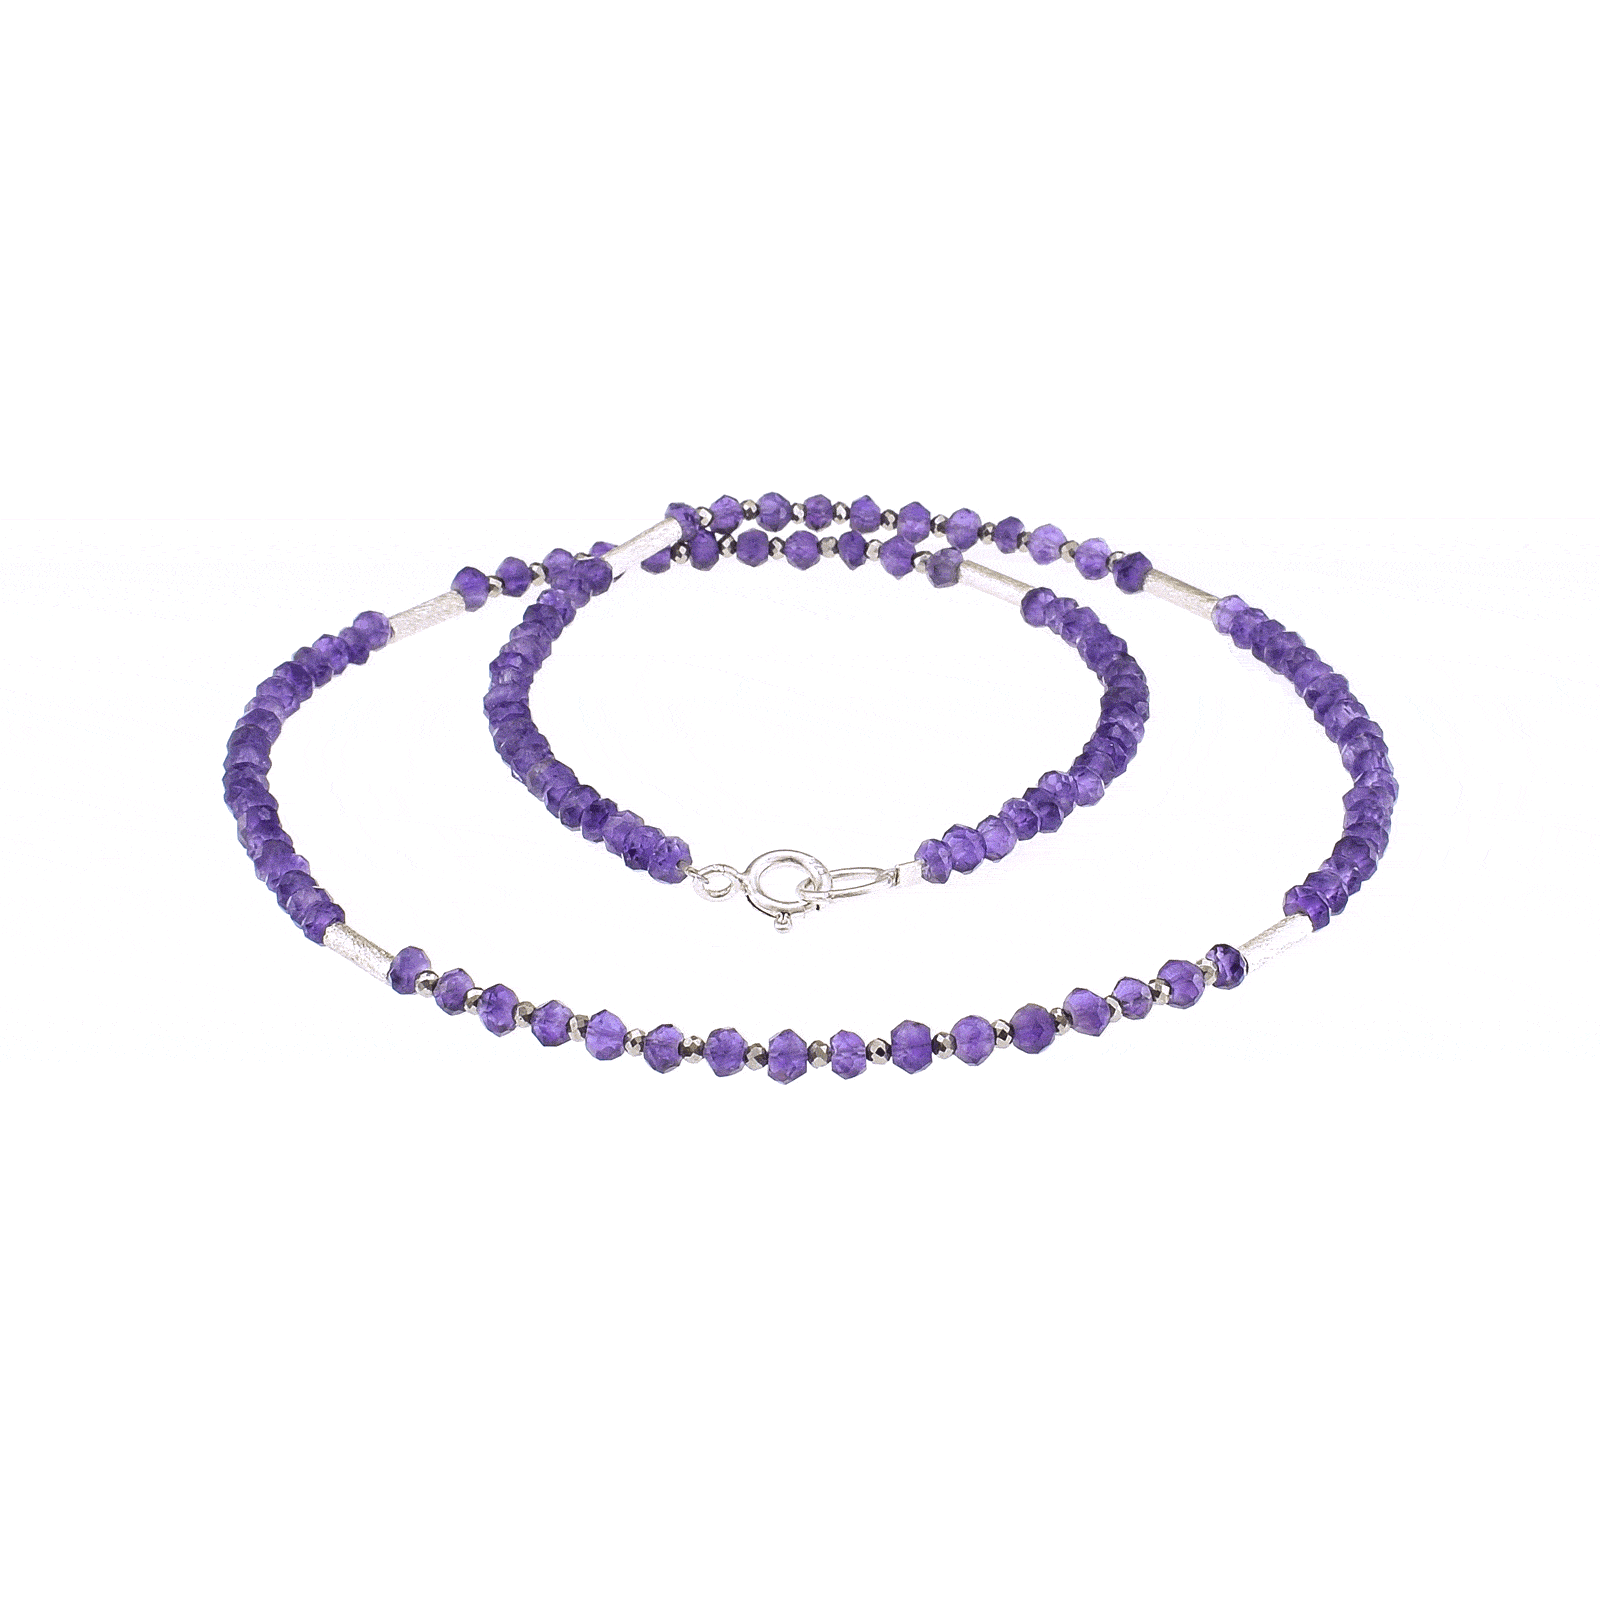 Necklace with Amethyst and Pyrite gemstones